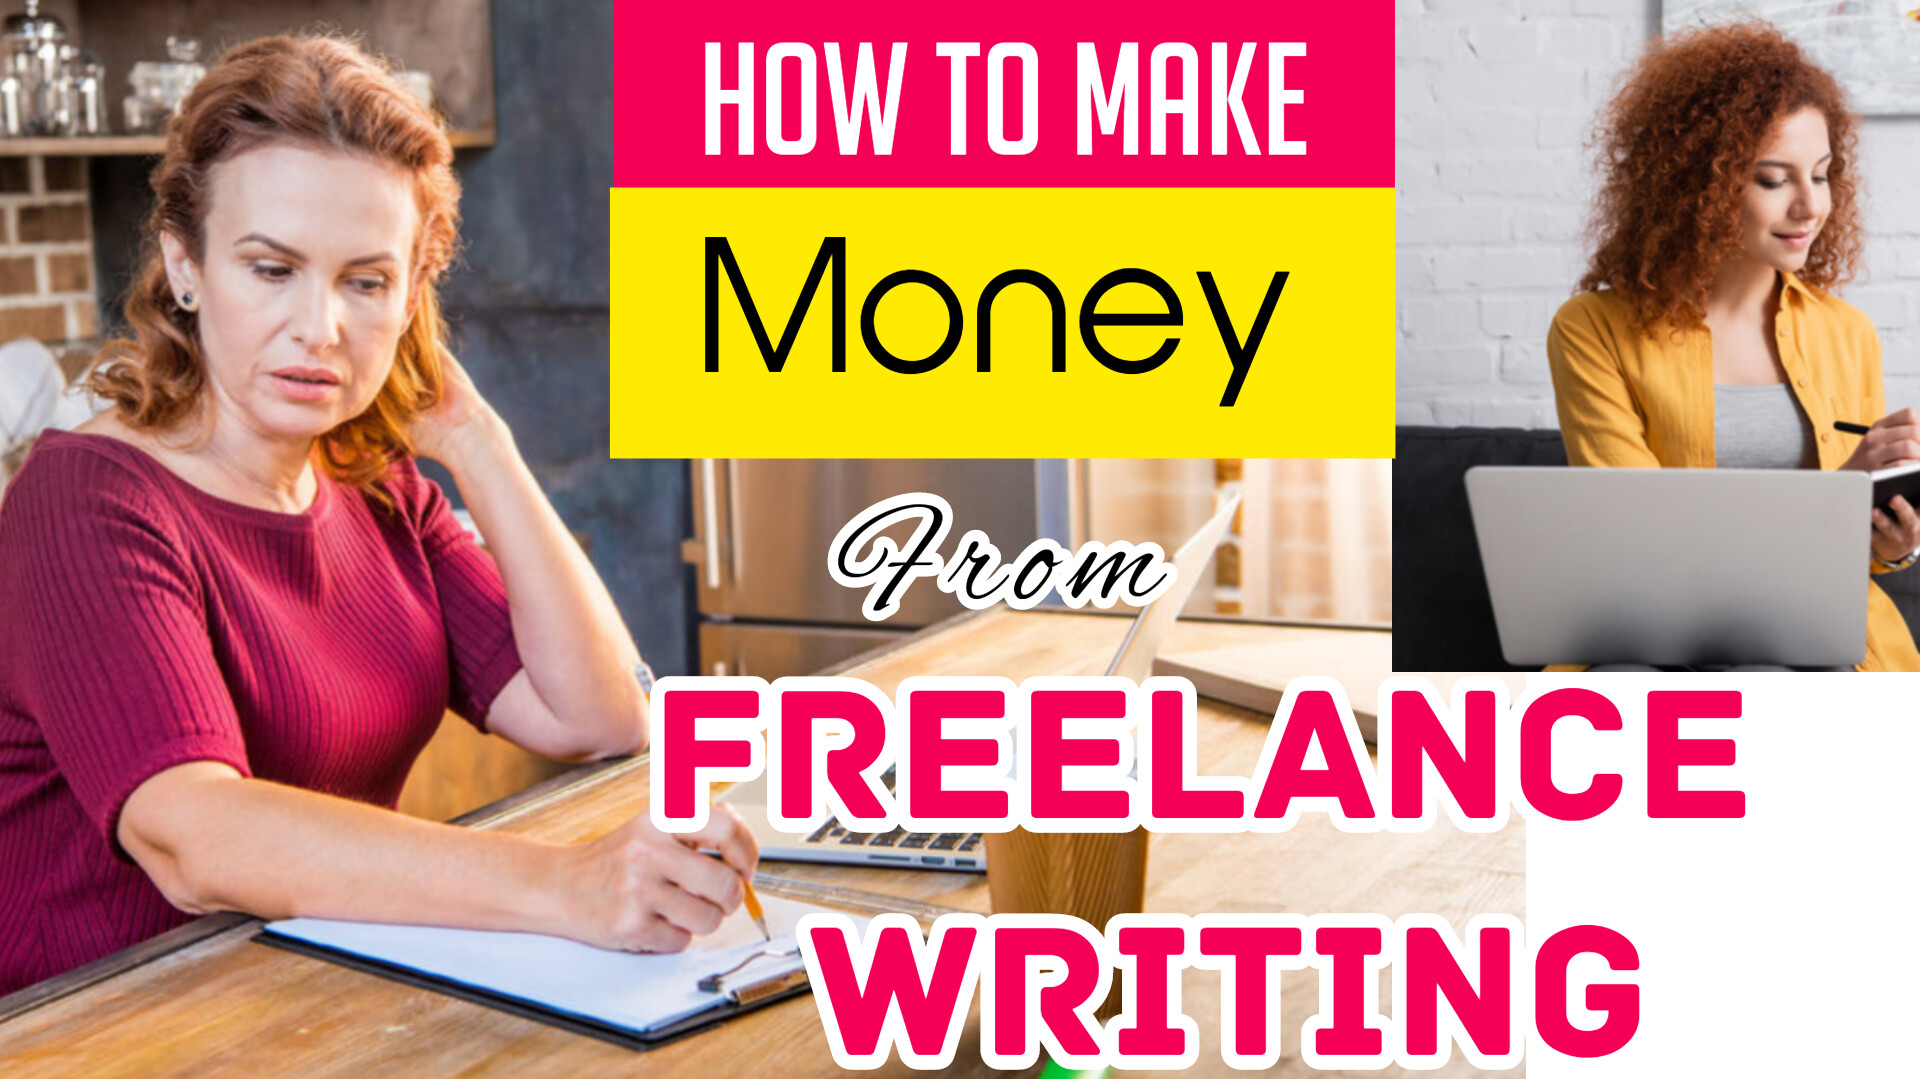 How To Make Money From Freelance Writing | How To Write And Earn Money